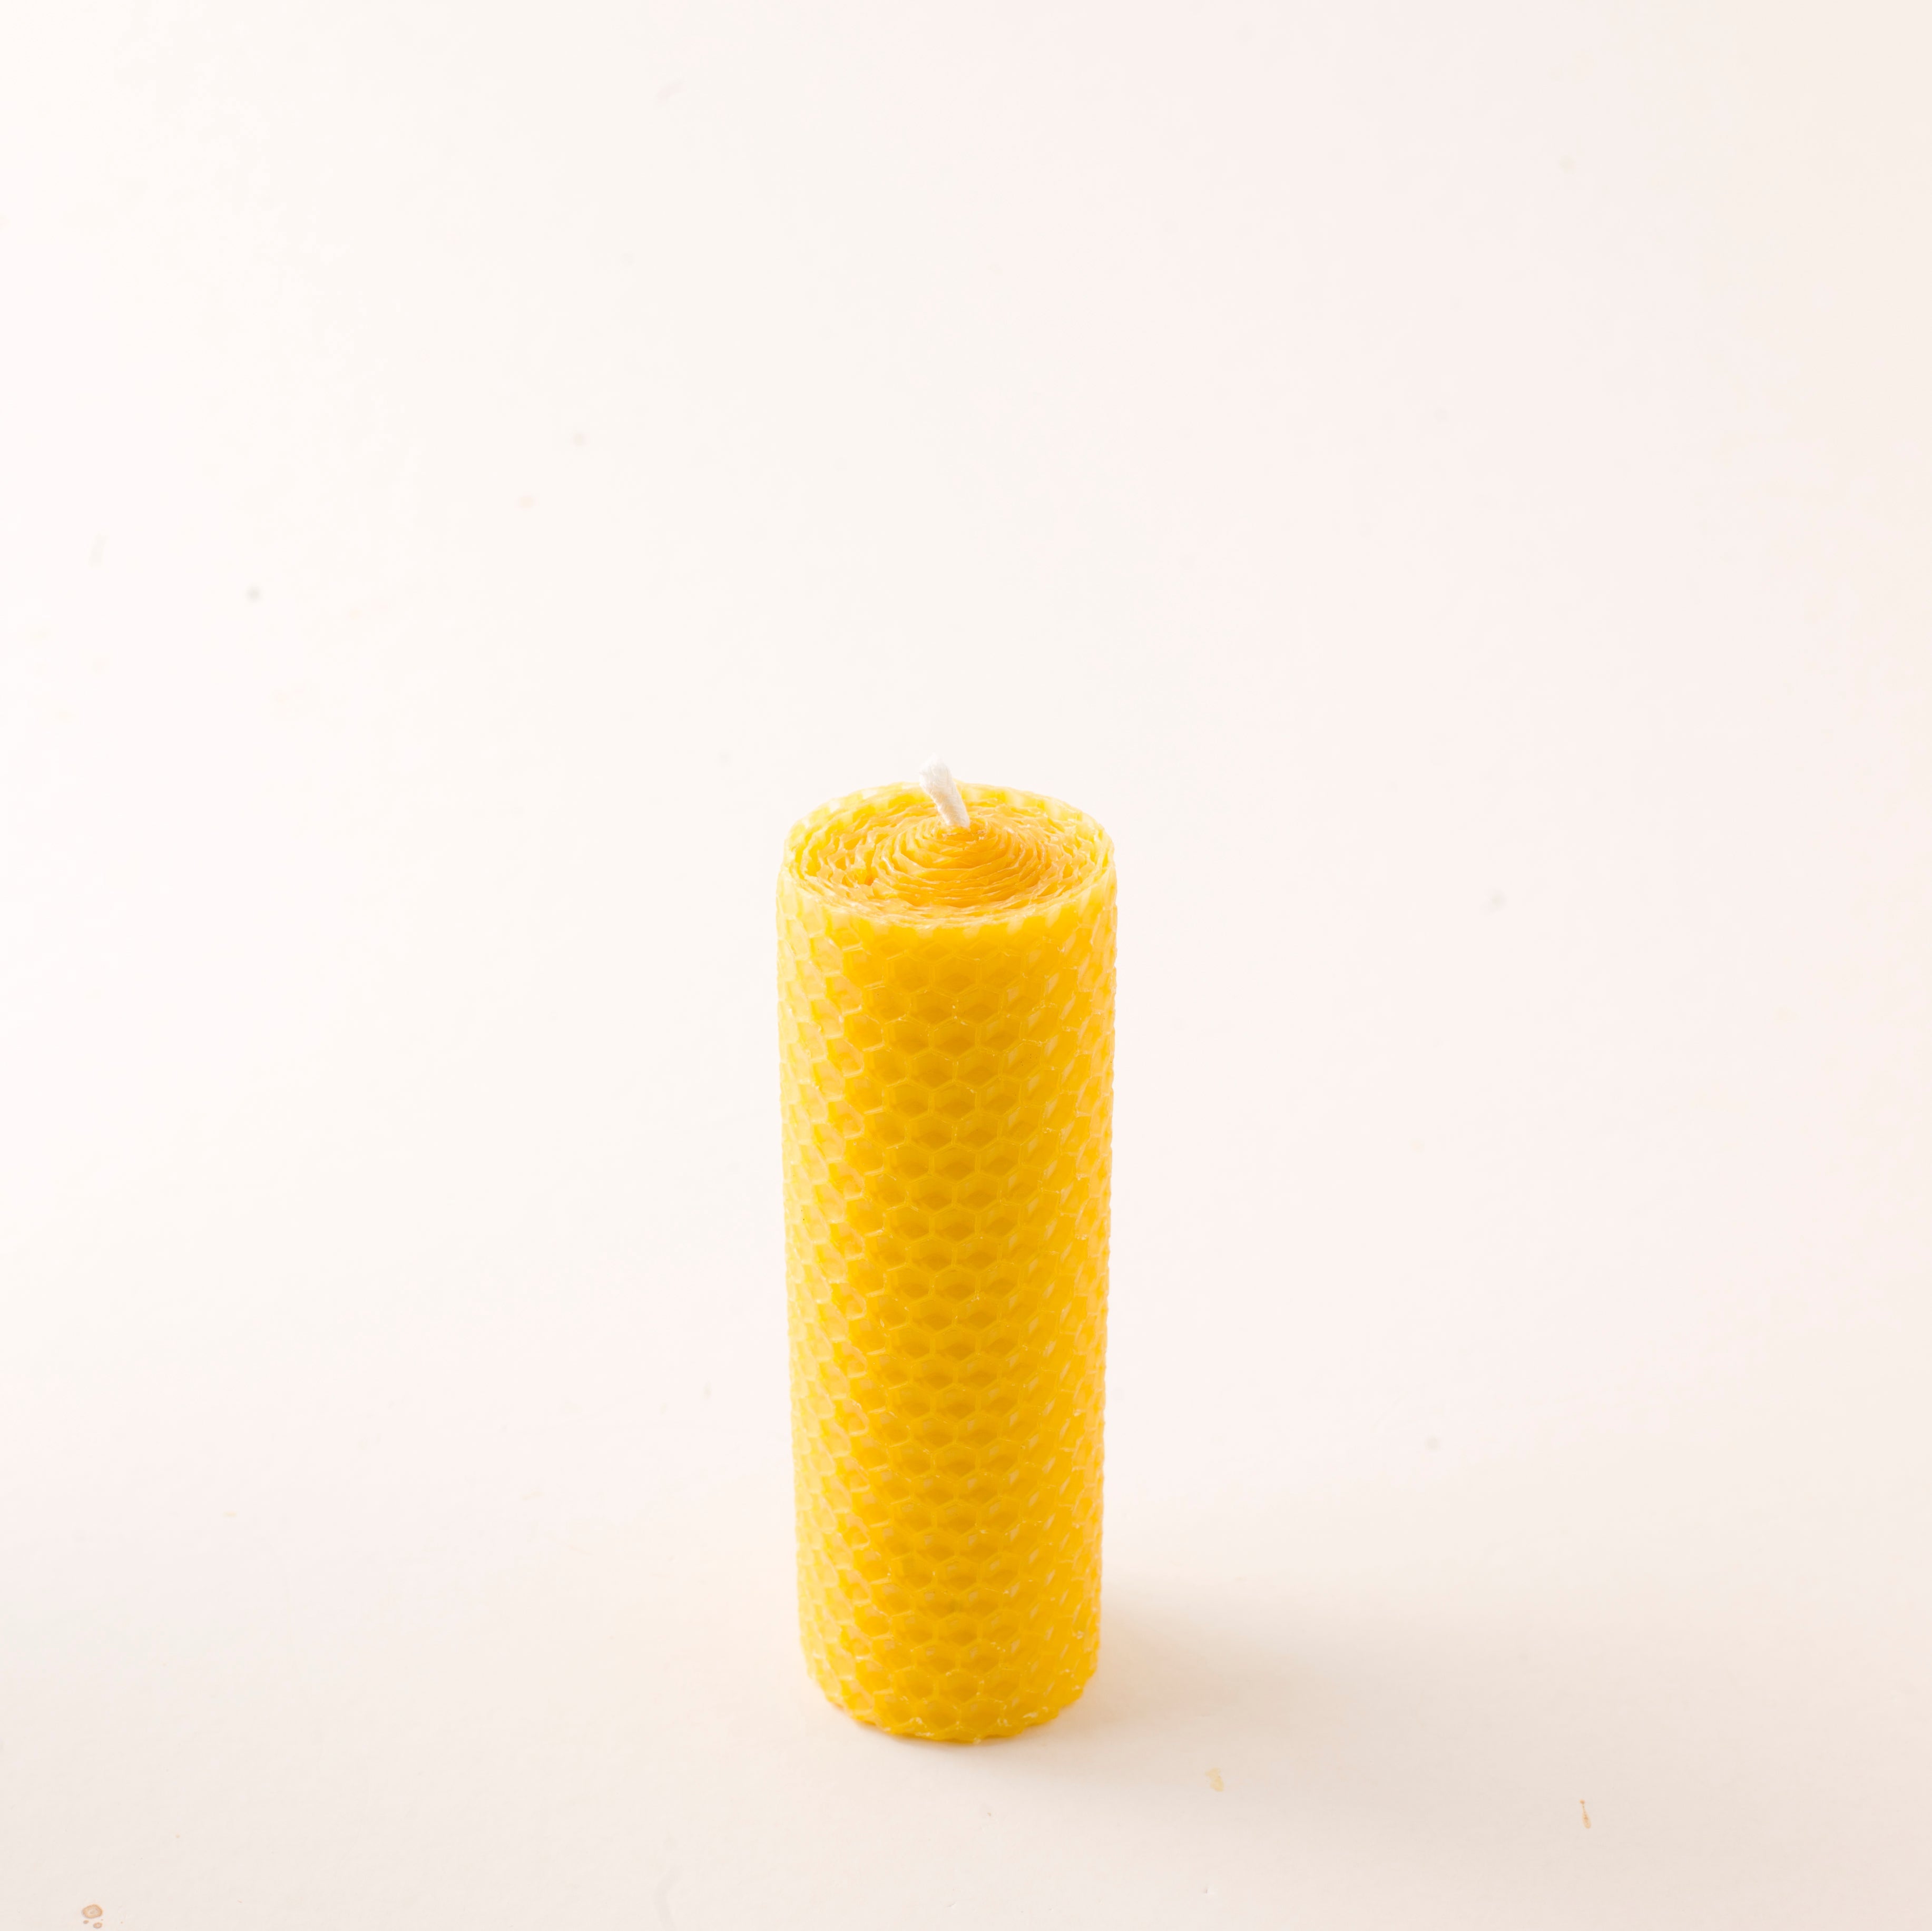 BEESWAX CANDLE - SIZE 5